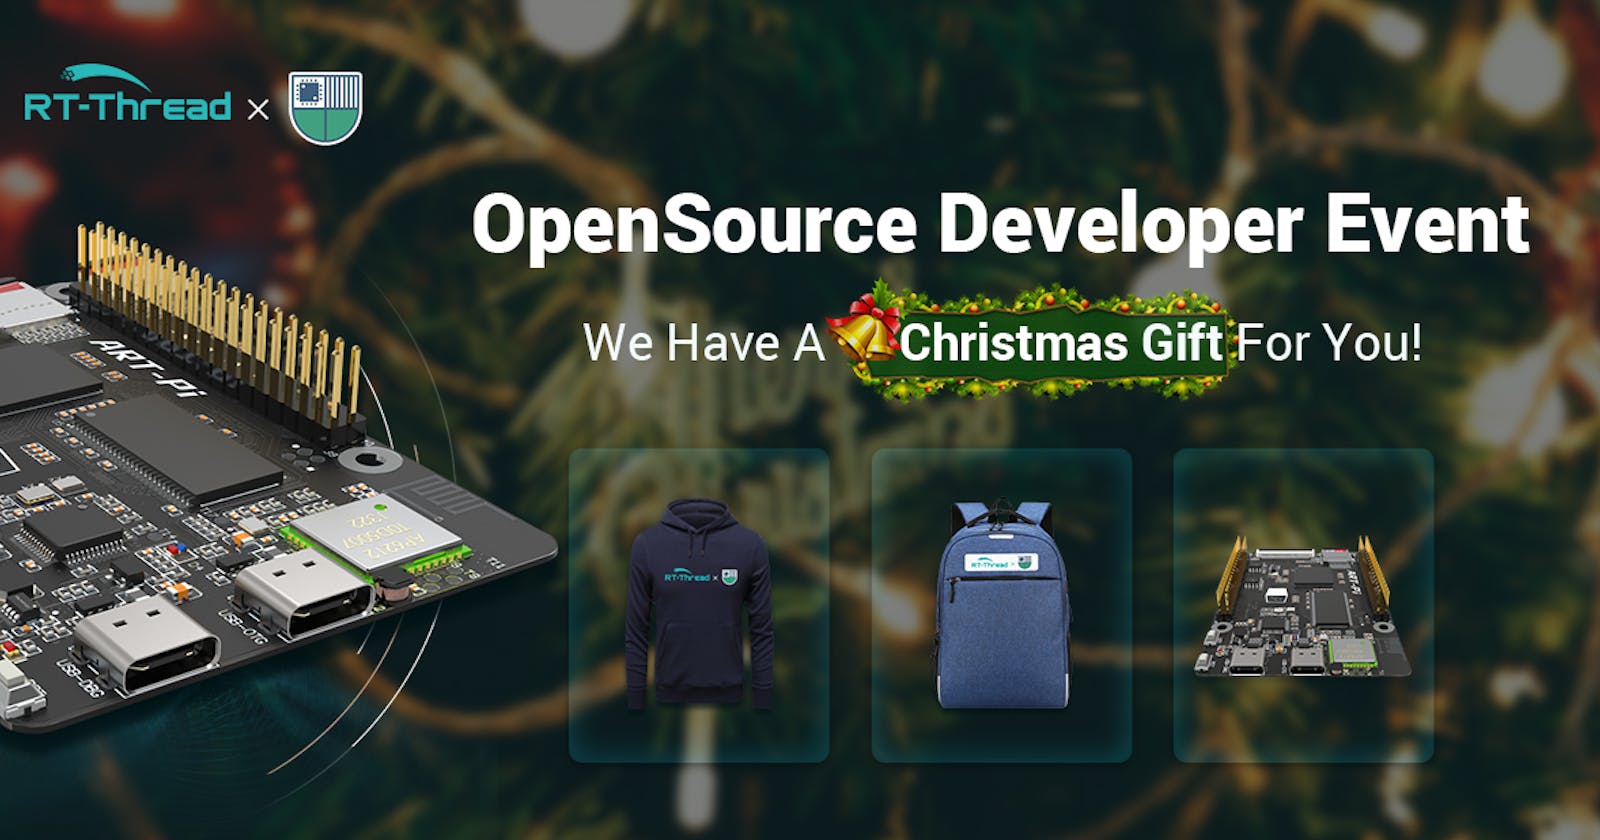 OpenSource Developer Contest is On!